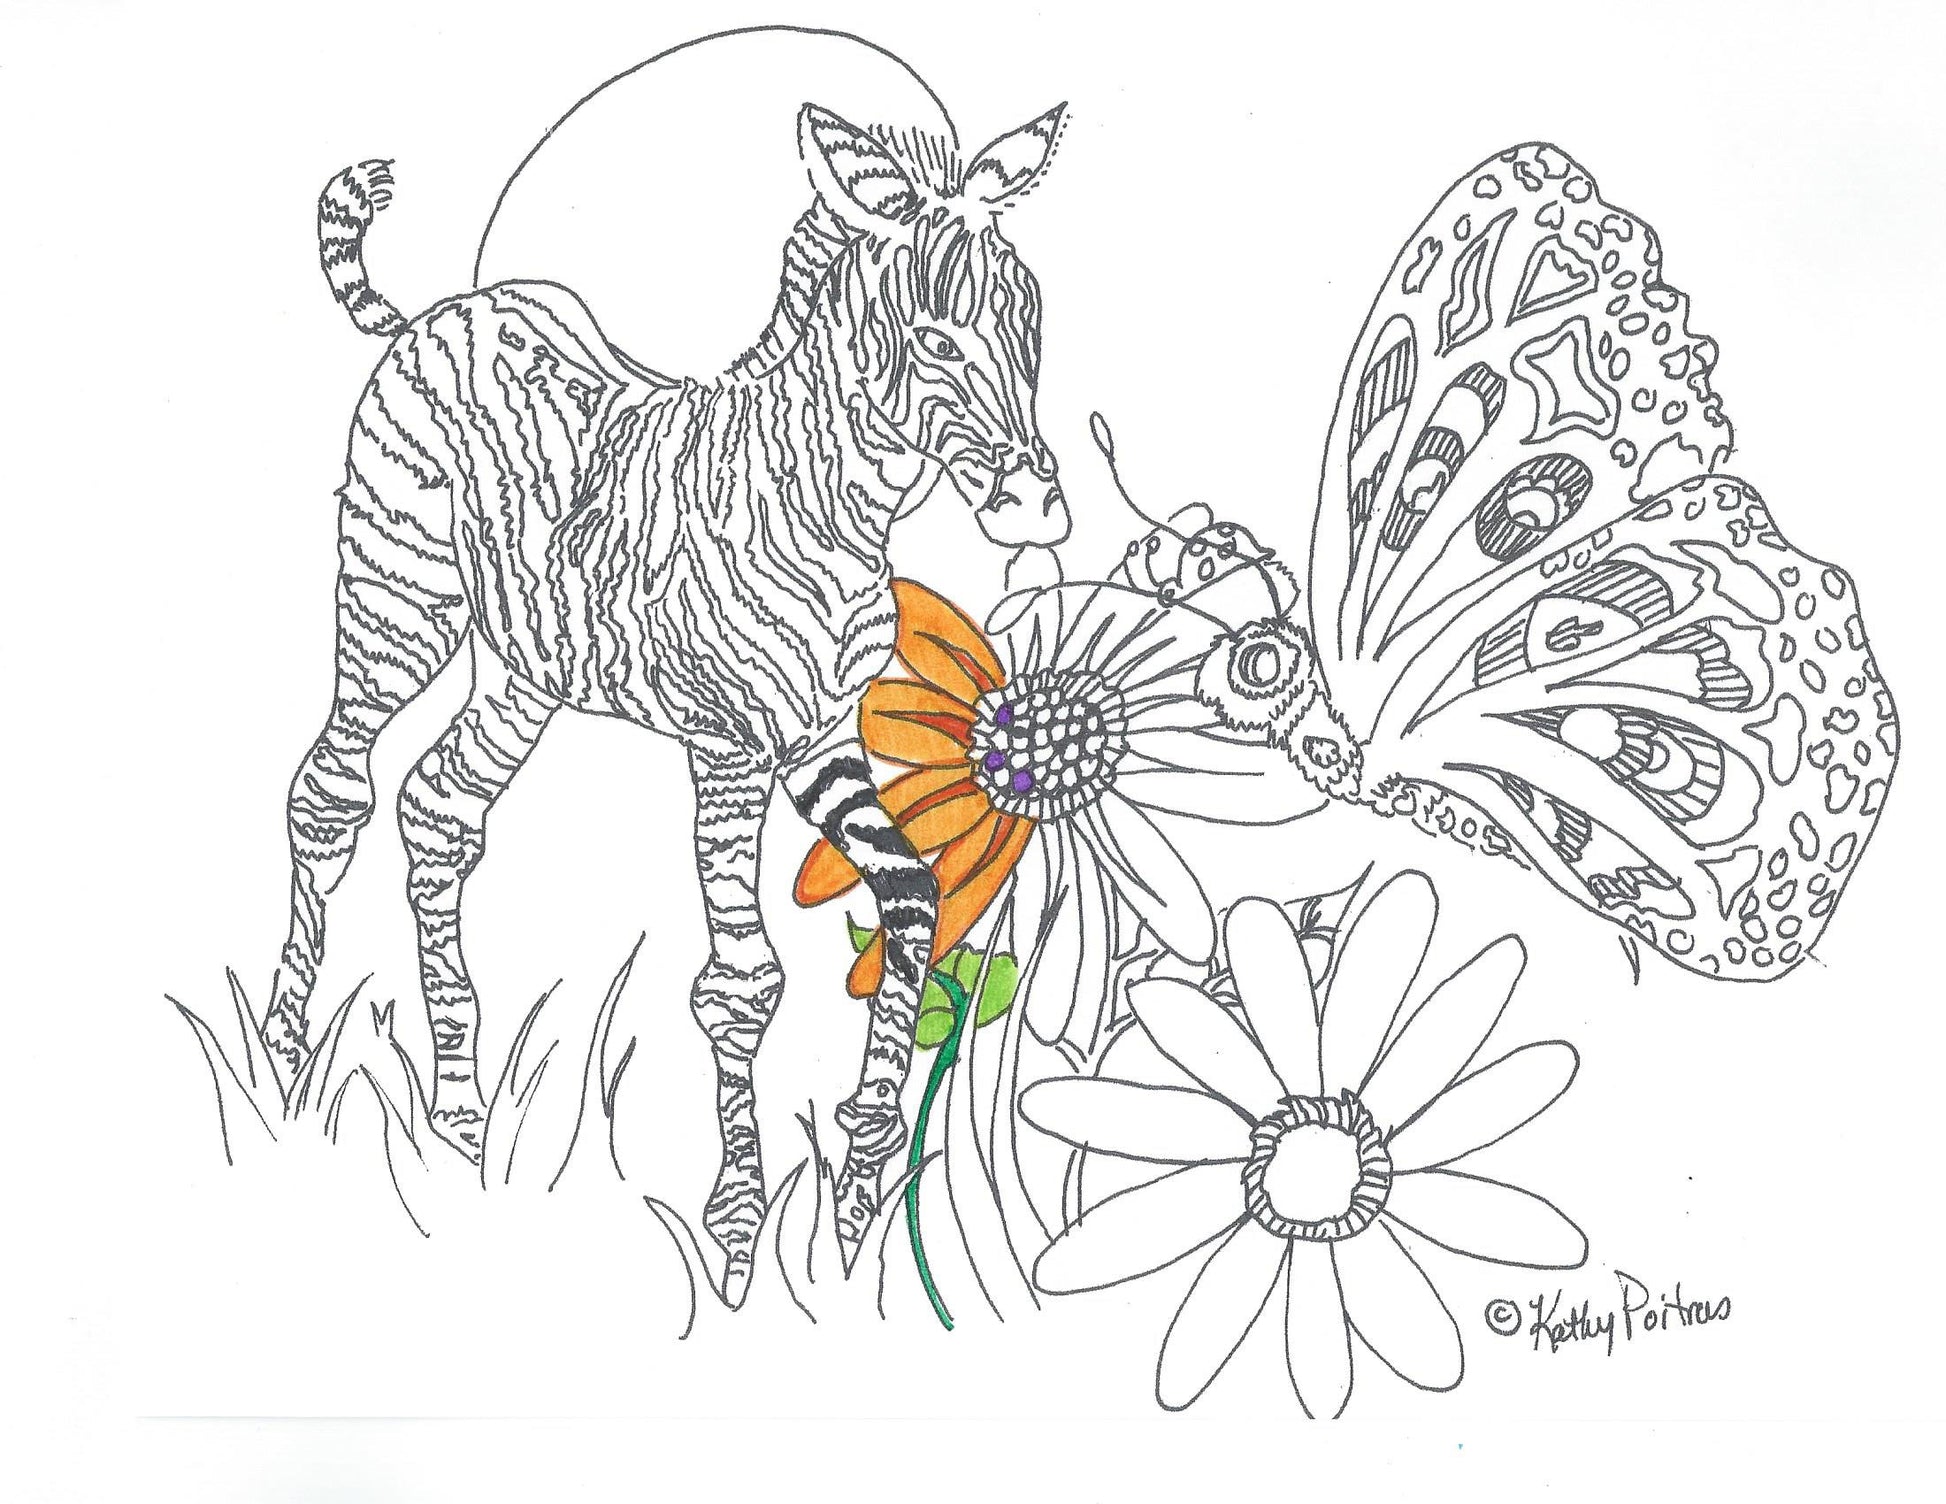 This color your own ink drawing of a baby zebra, butterfly and ladybug